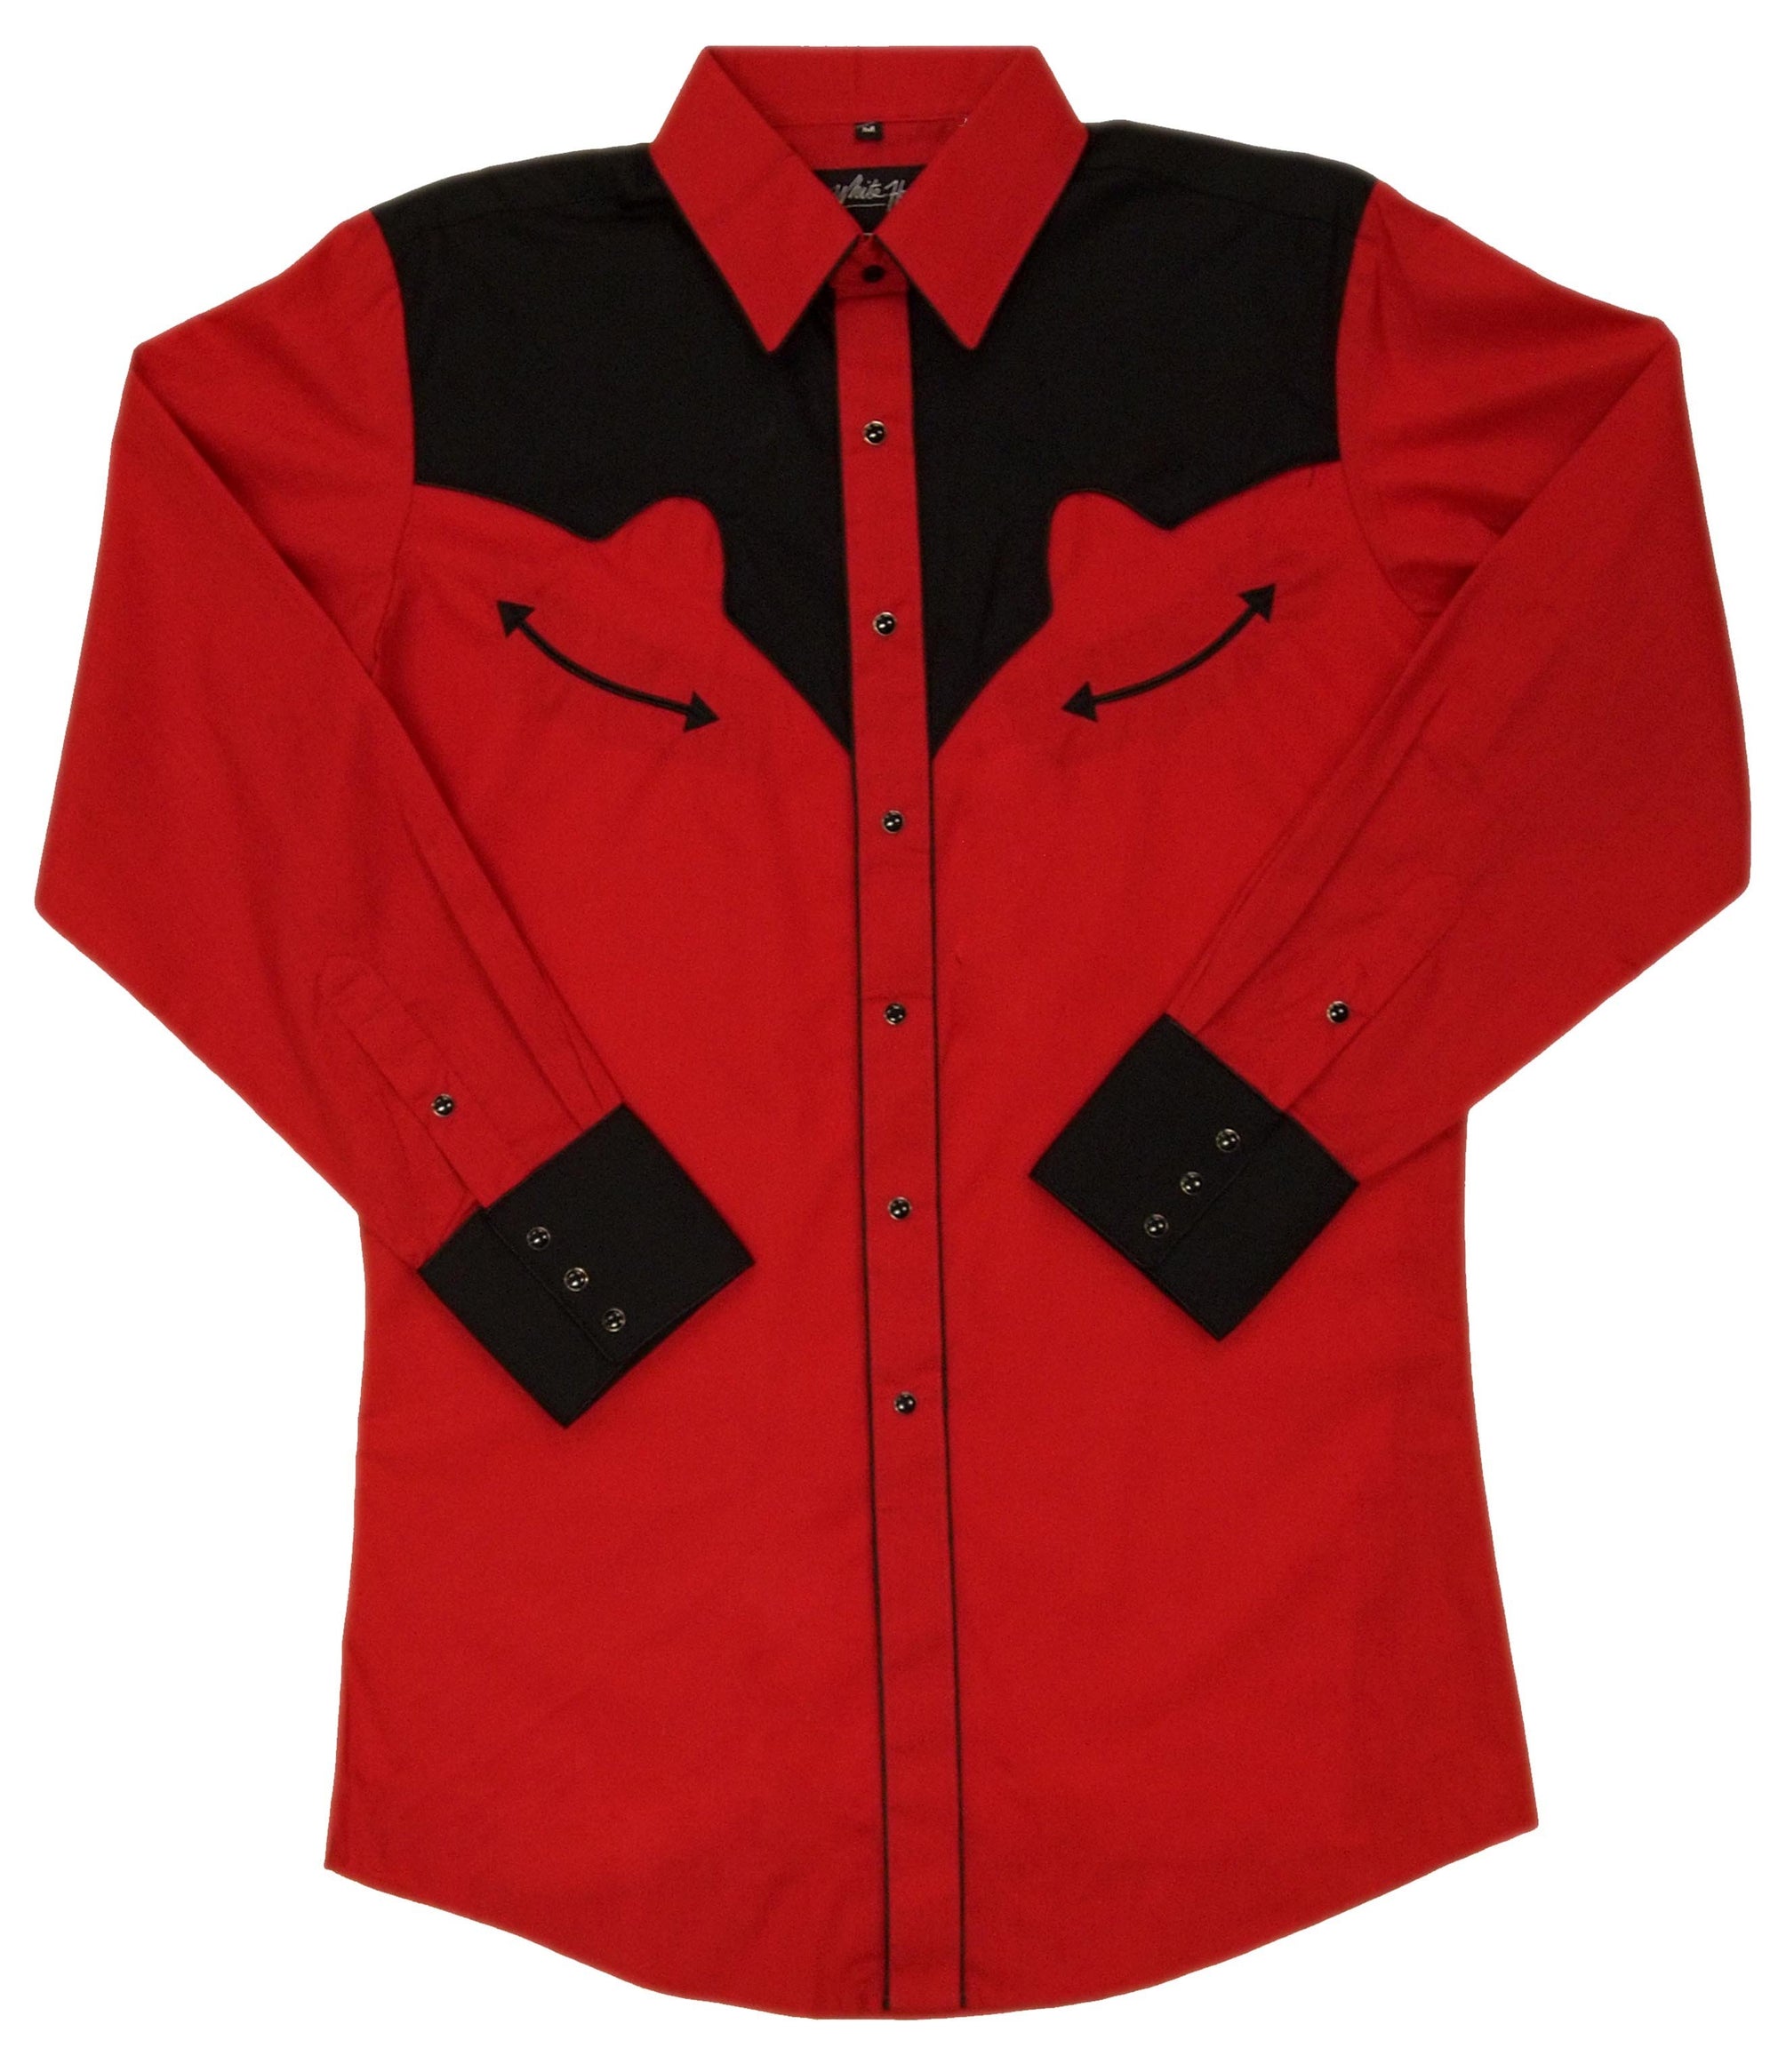 White Horse Apparel Men's Western Shirt Retro Red and Black